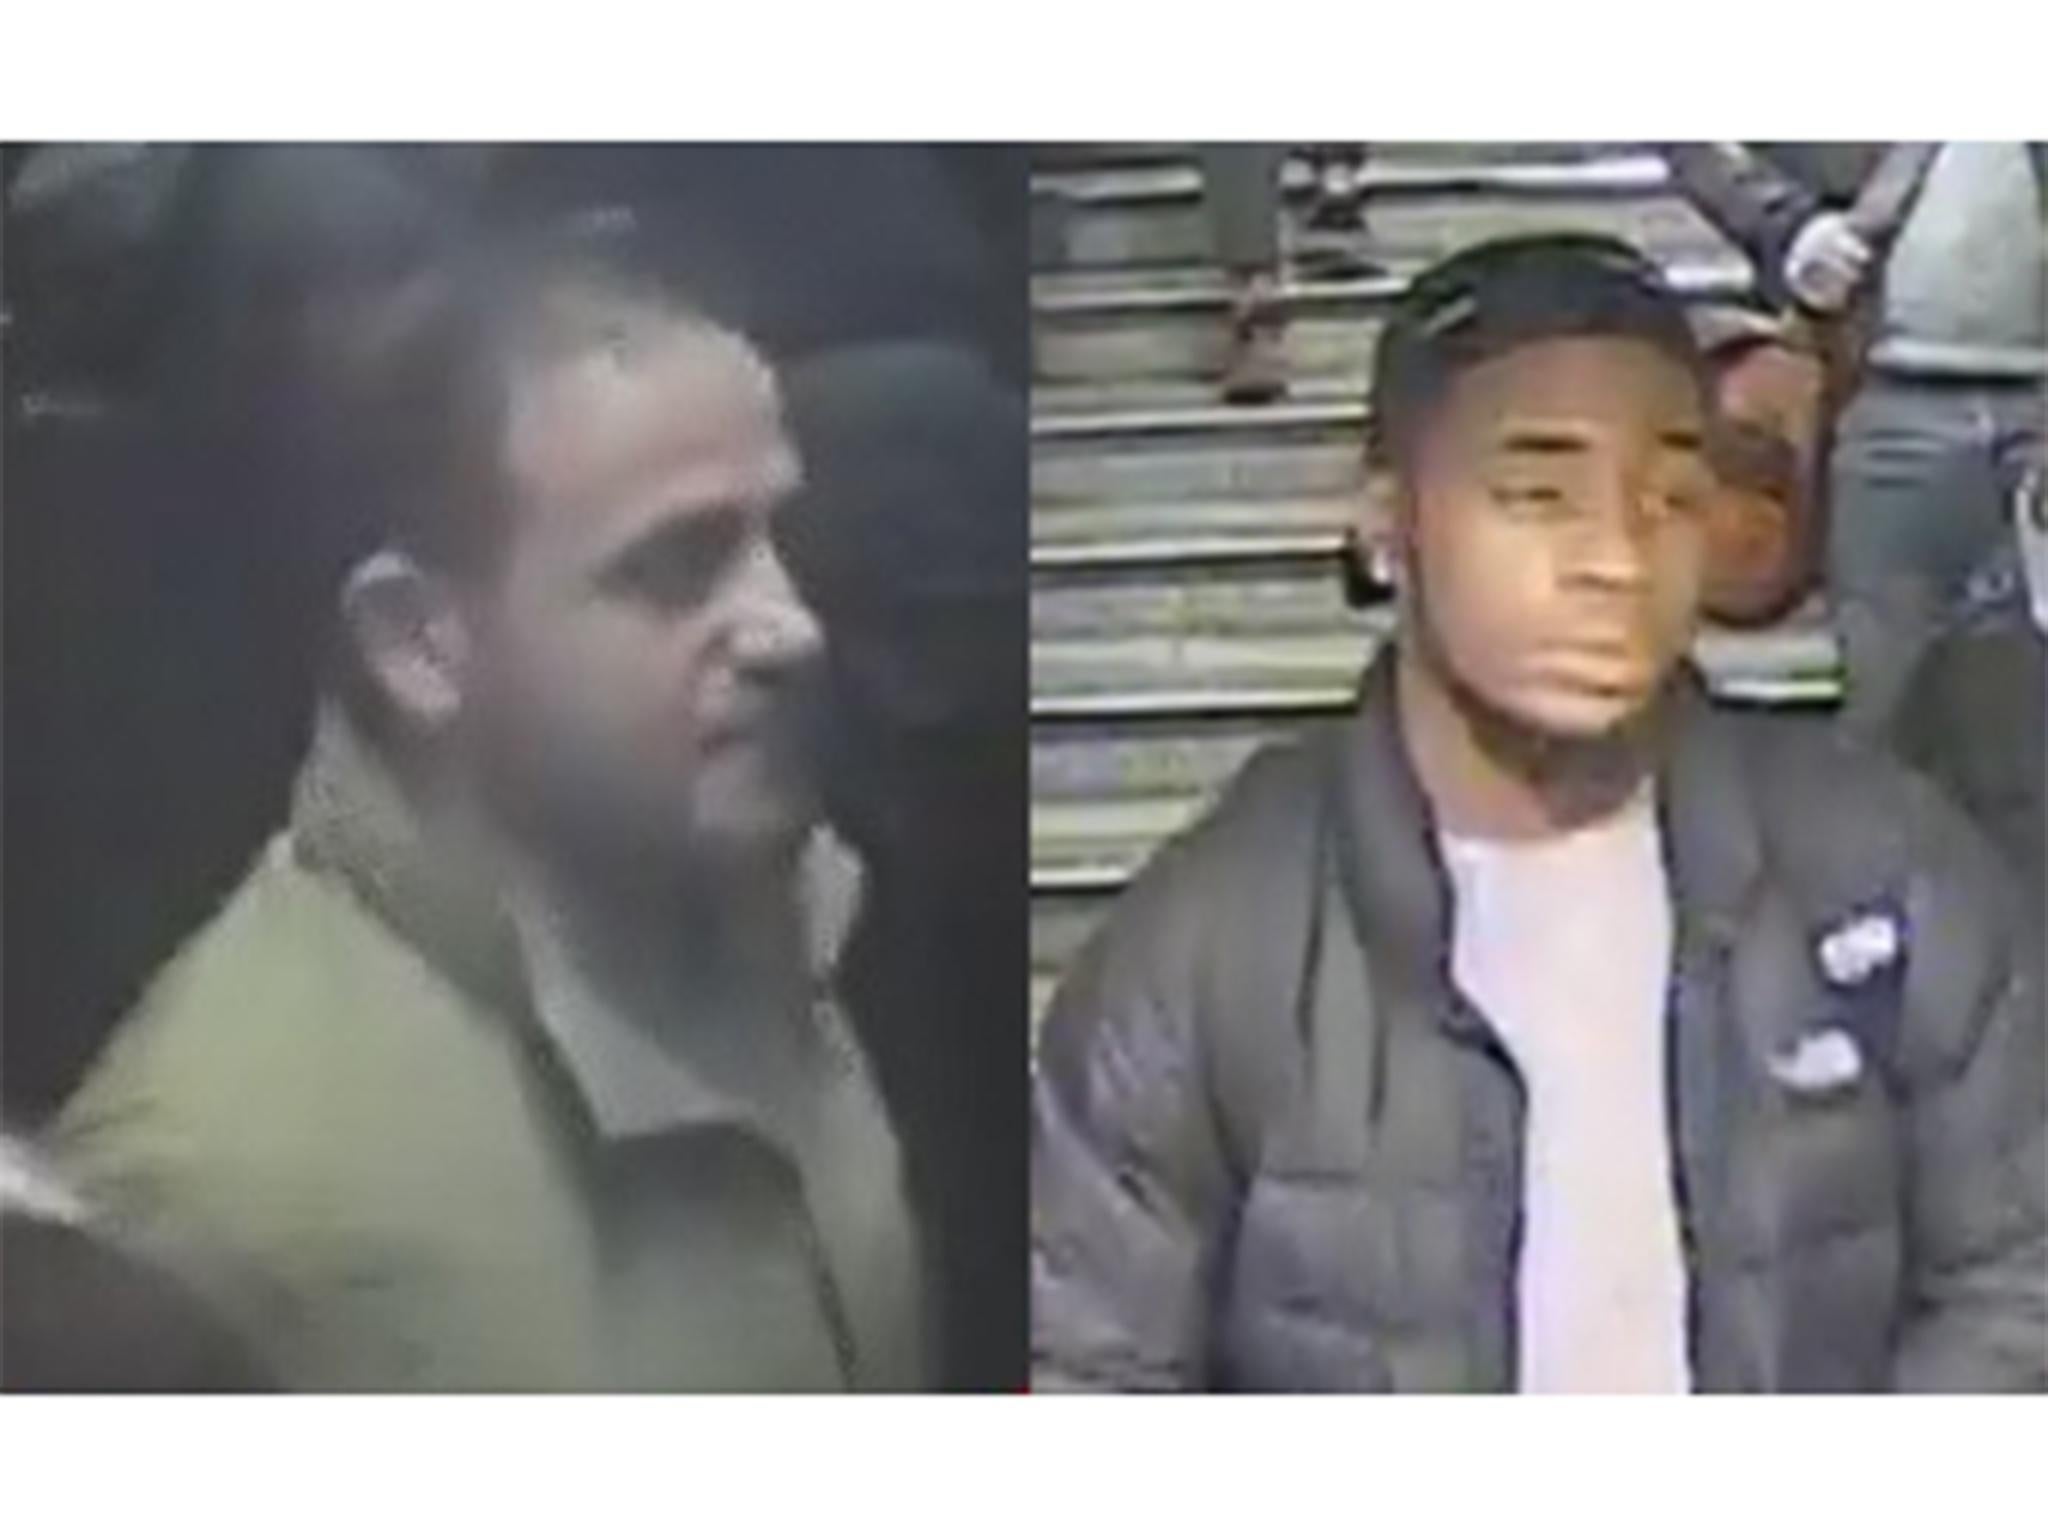 Police have released images on the men they want to talk to